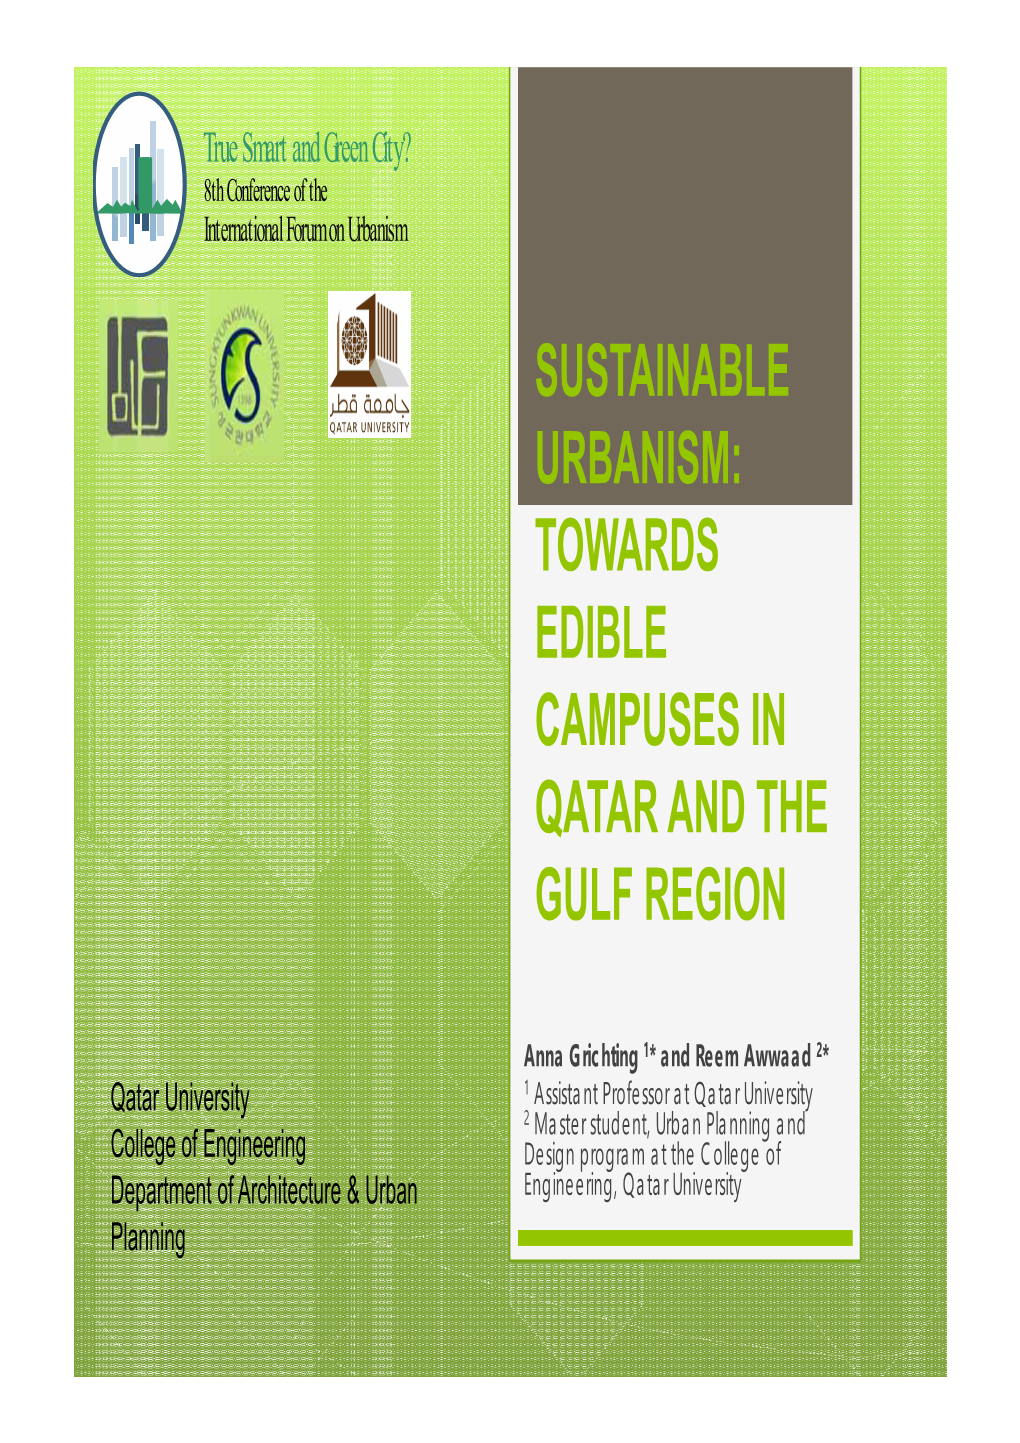 Sustainable Urbanism: Towards Edible Campuses in Qatar and the Gulf Region